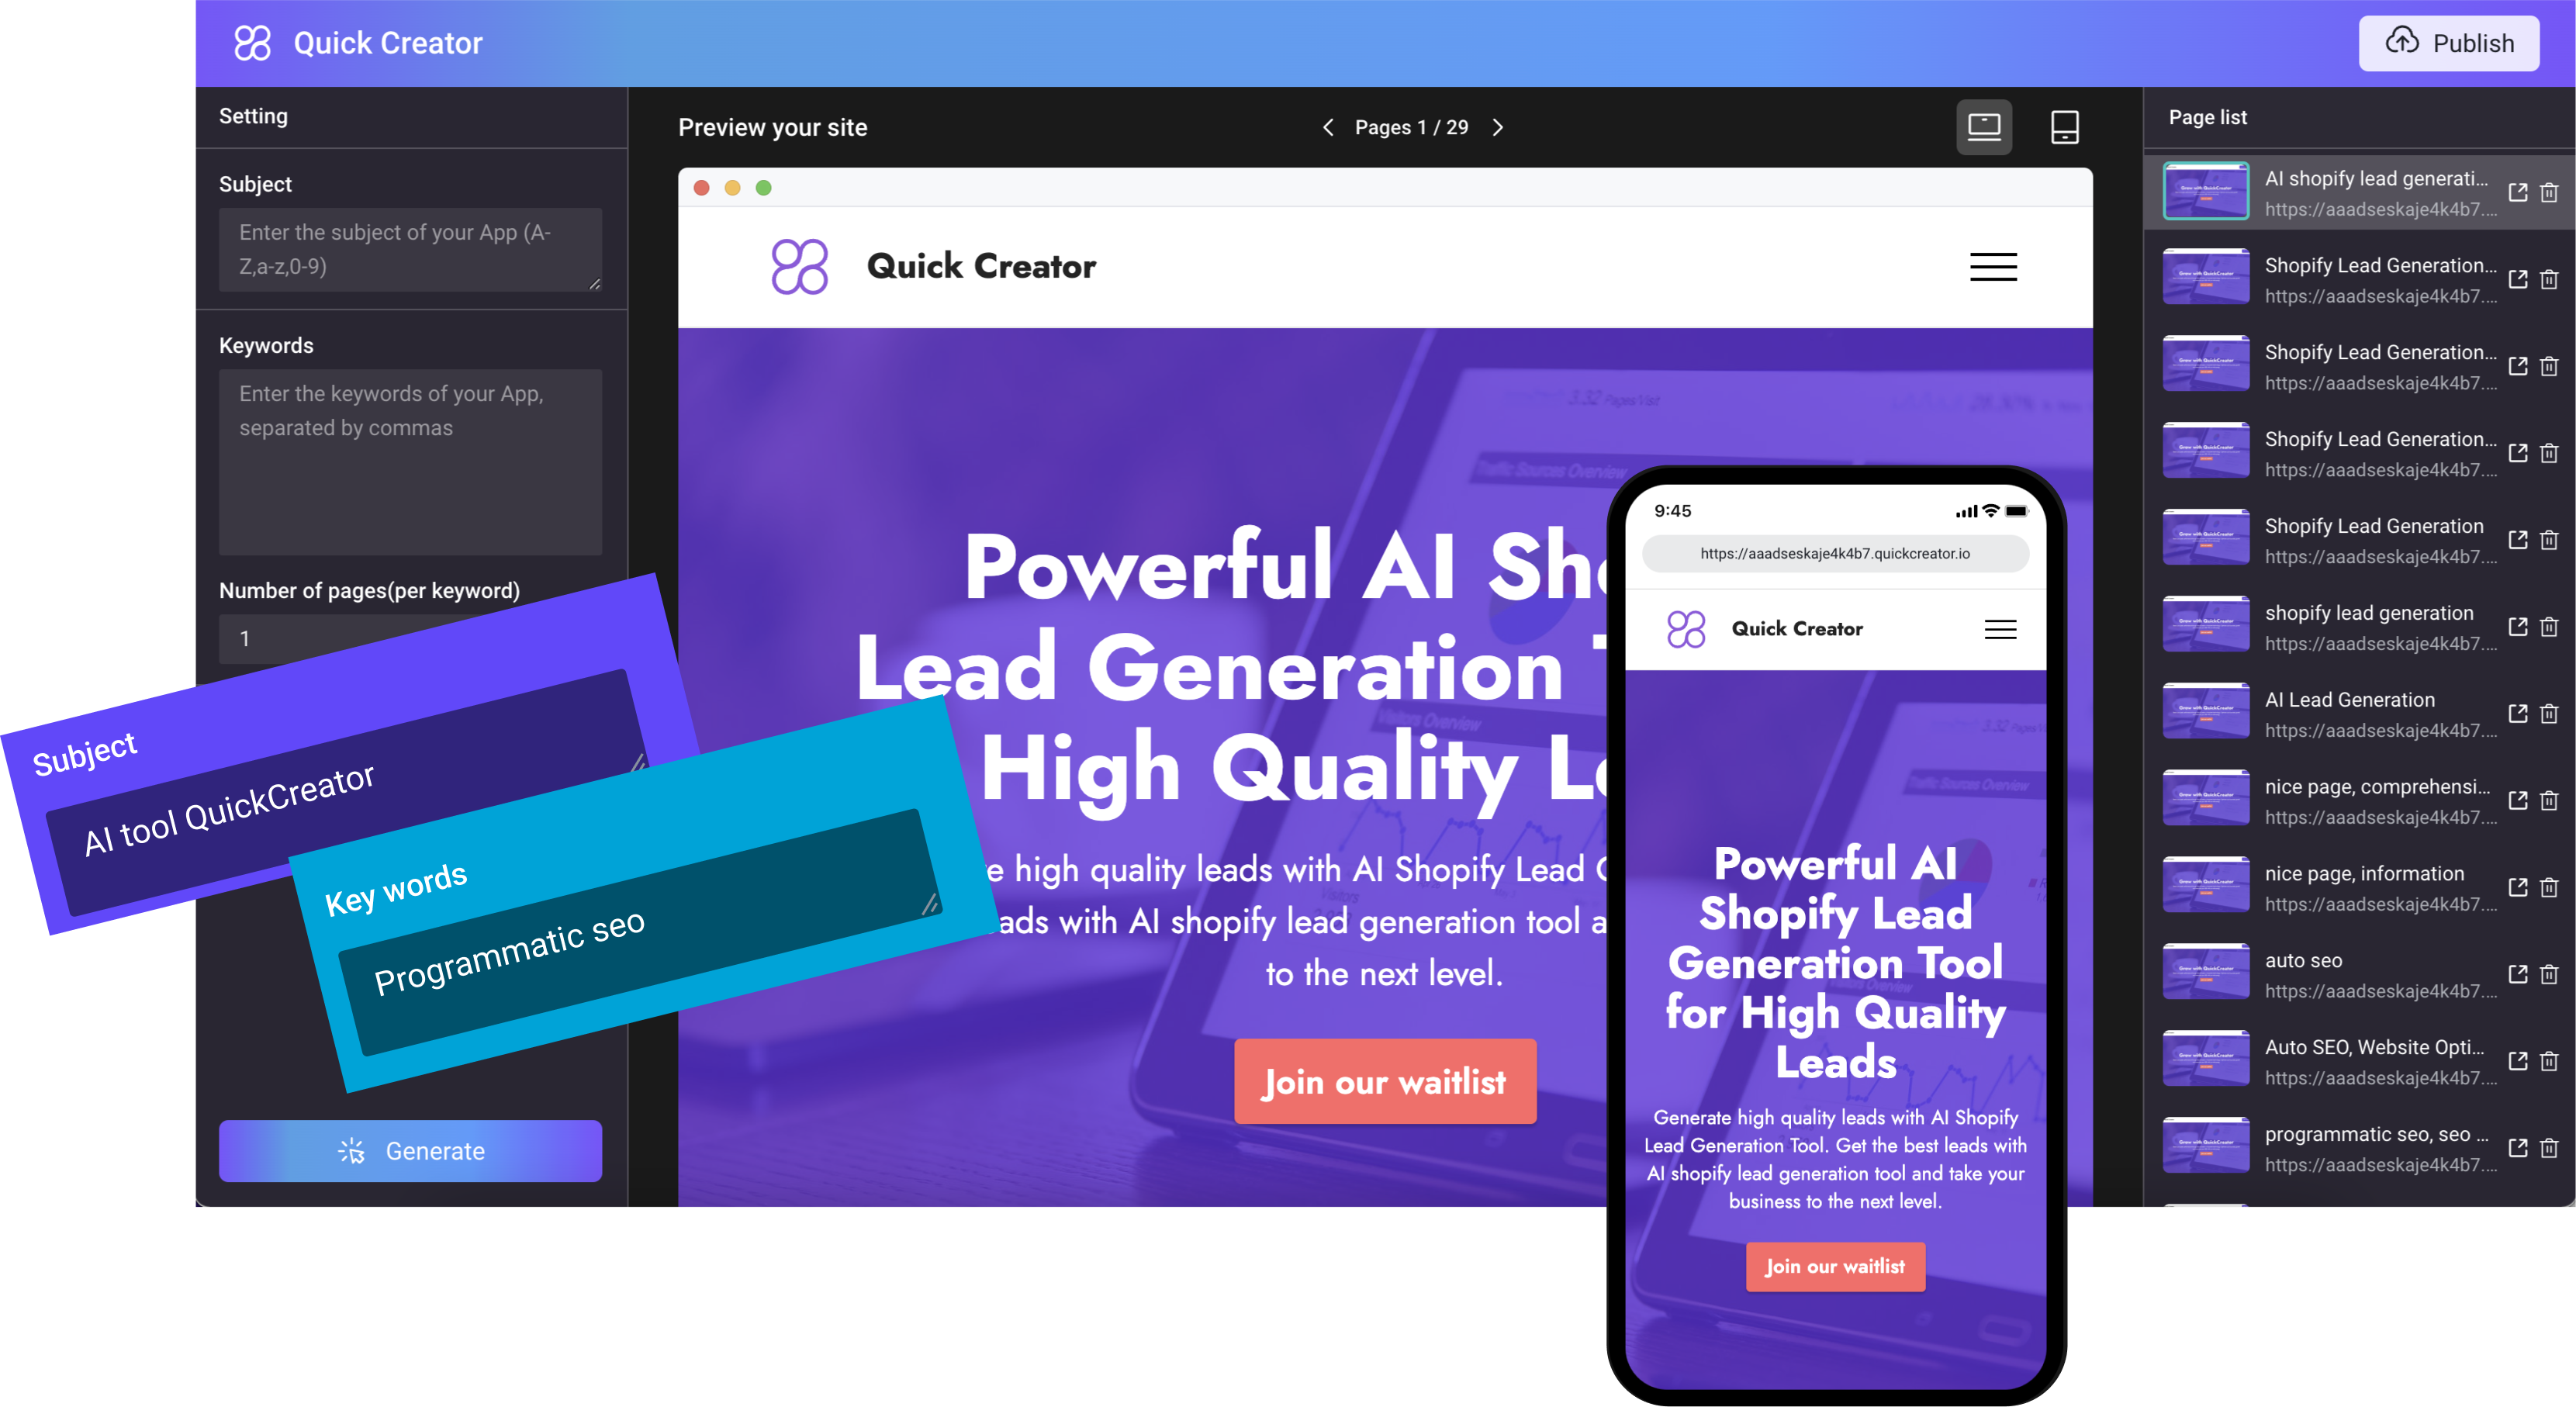 10 Steps to Creating High-Converting Landing Pages with AI